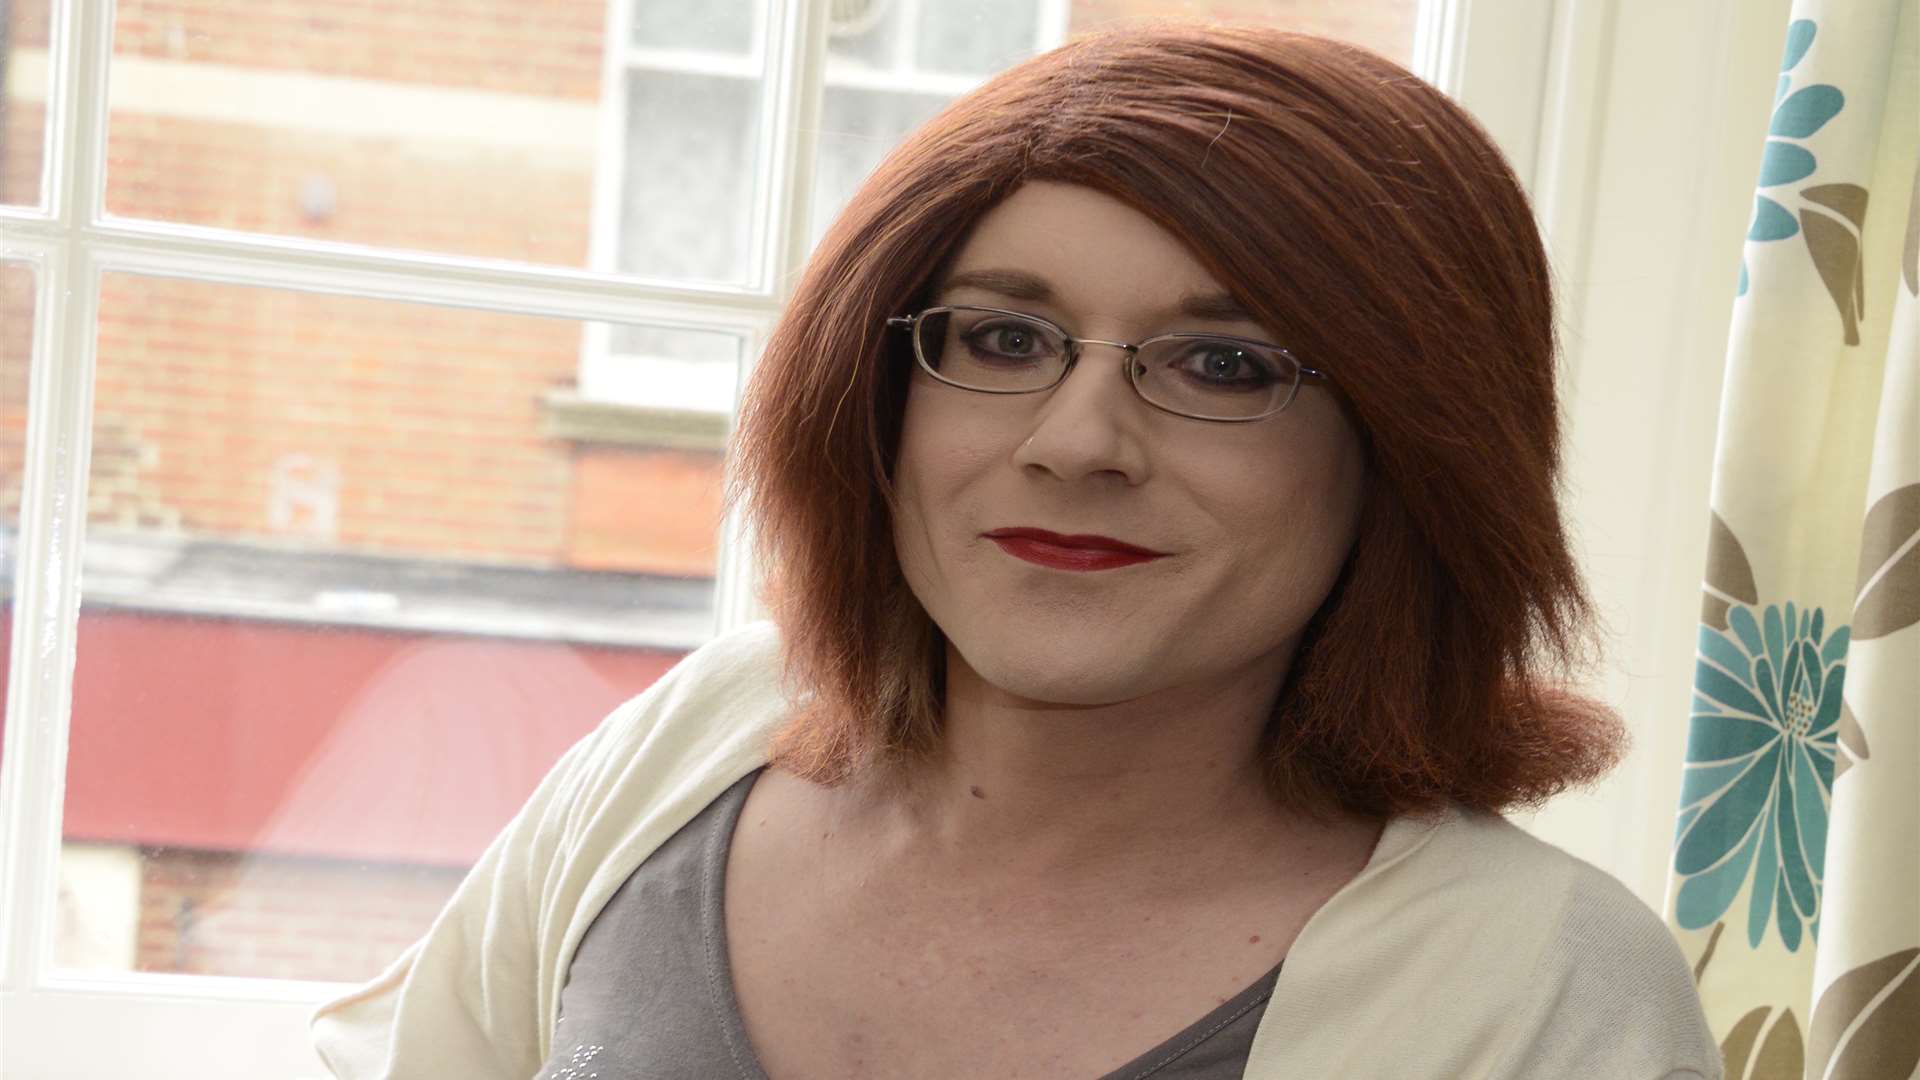 Hythe Transgender Woman Seeks Help To Fund Completing Her Treatment 7412